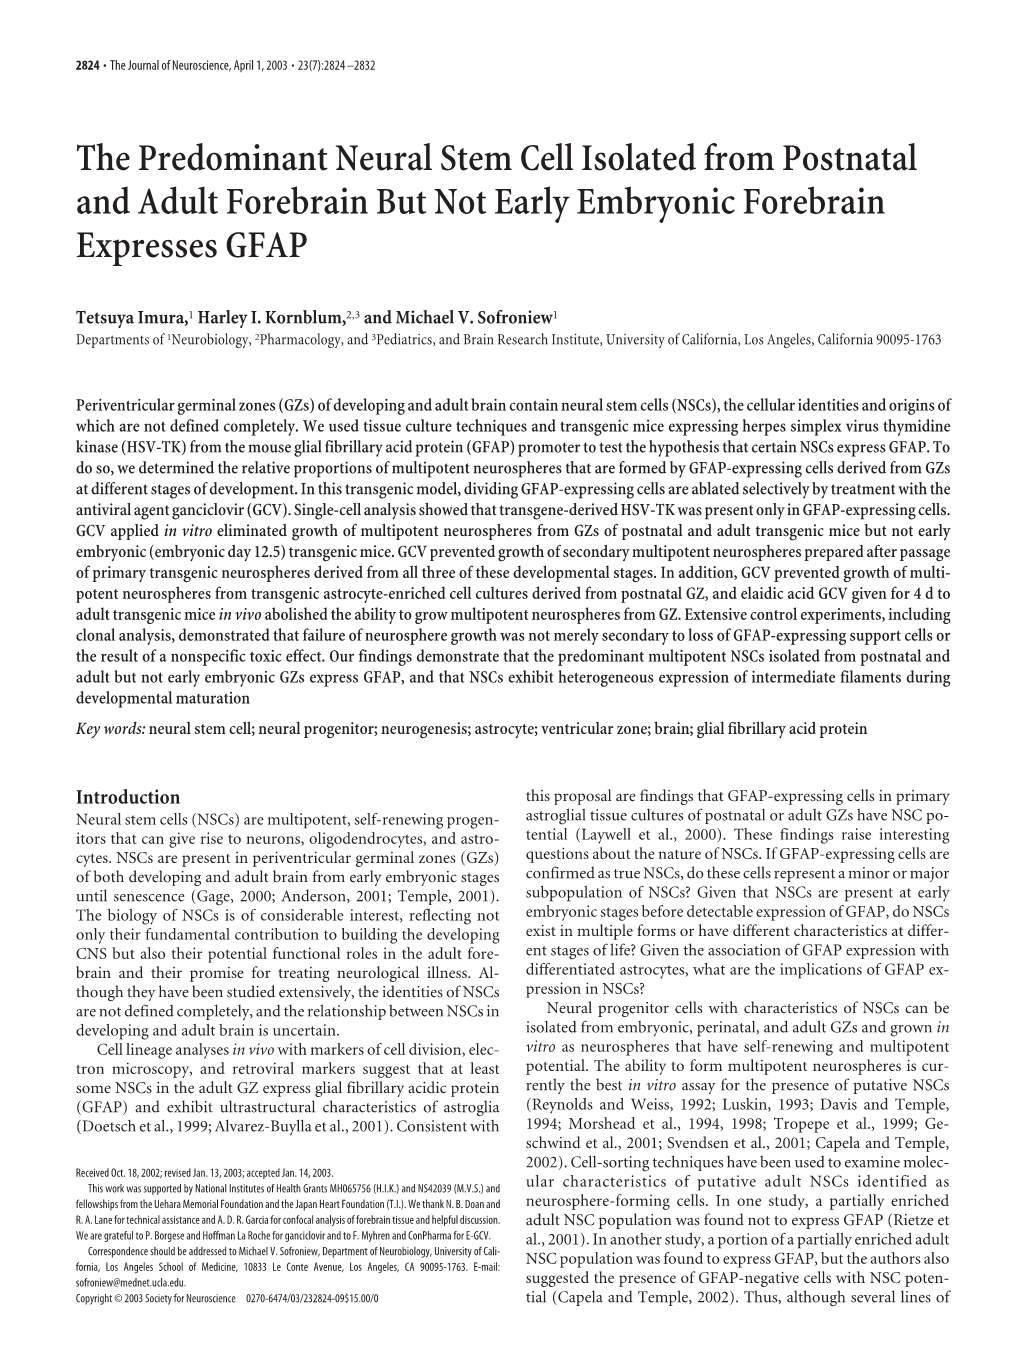 The Predominant Neural Stem Cell Isolated from Postnatal and Adult Forebrain but Not Early Embryonic Forebrain Expresses GFAP